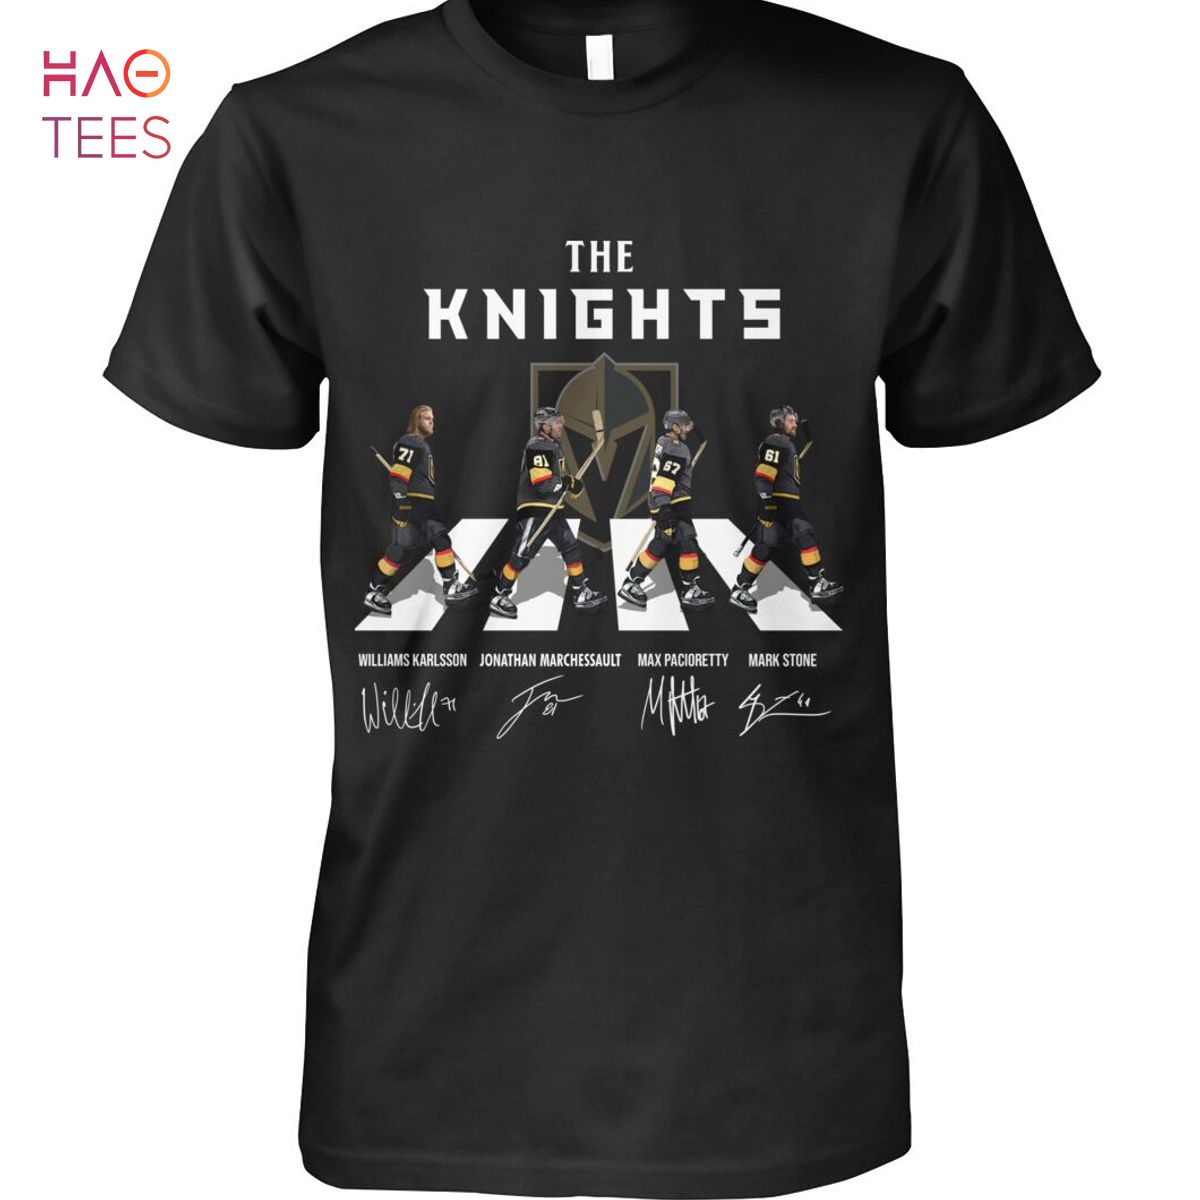 The Knights Shirt Limited Edition